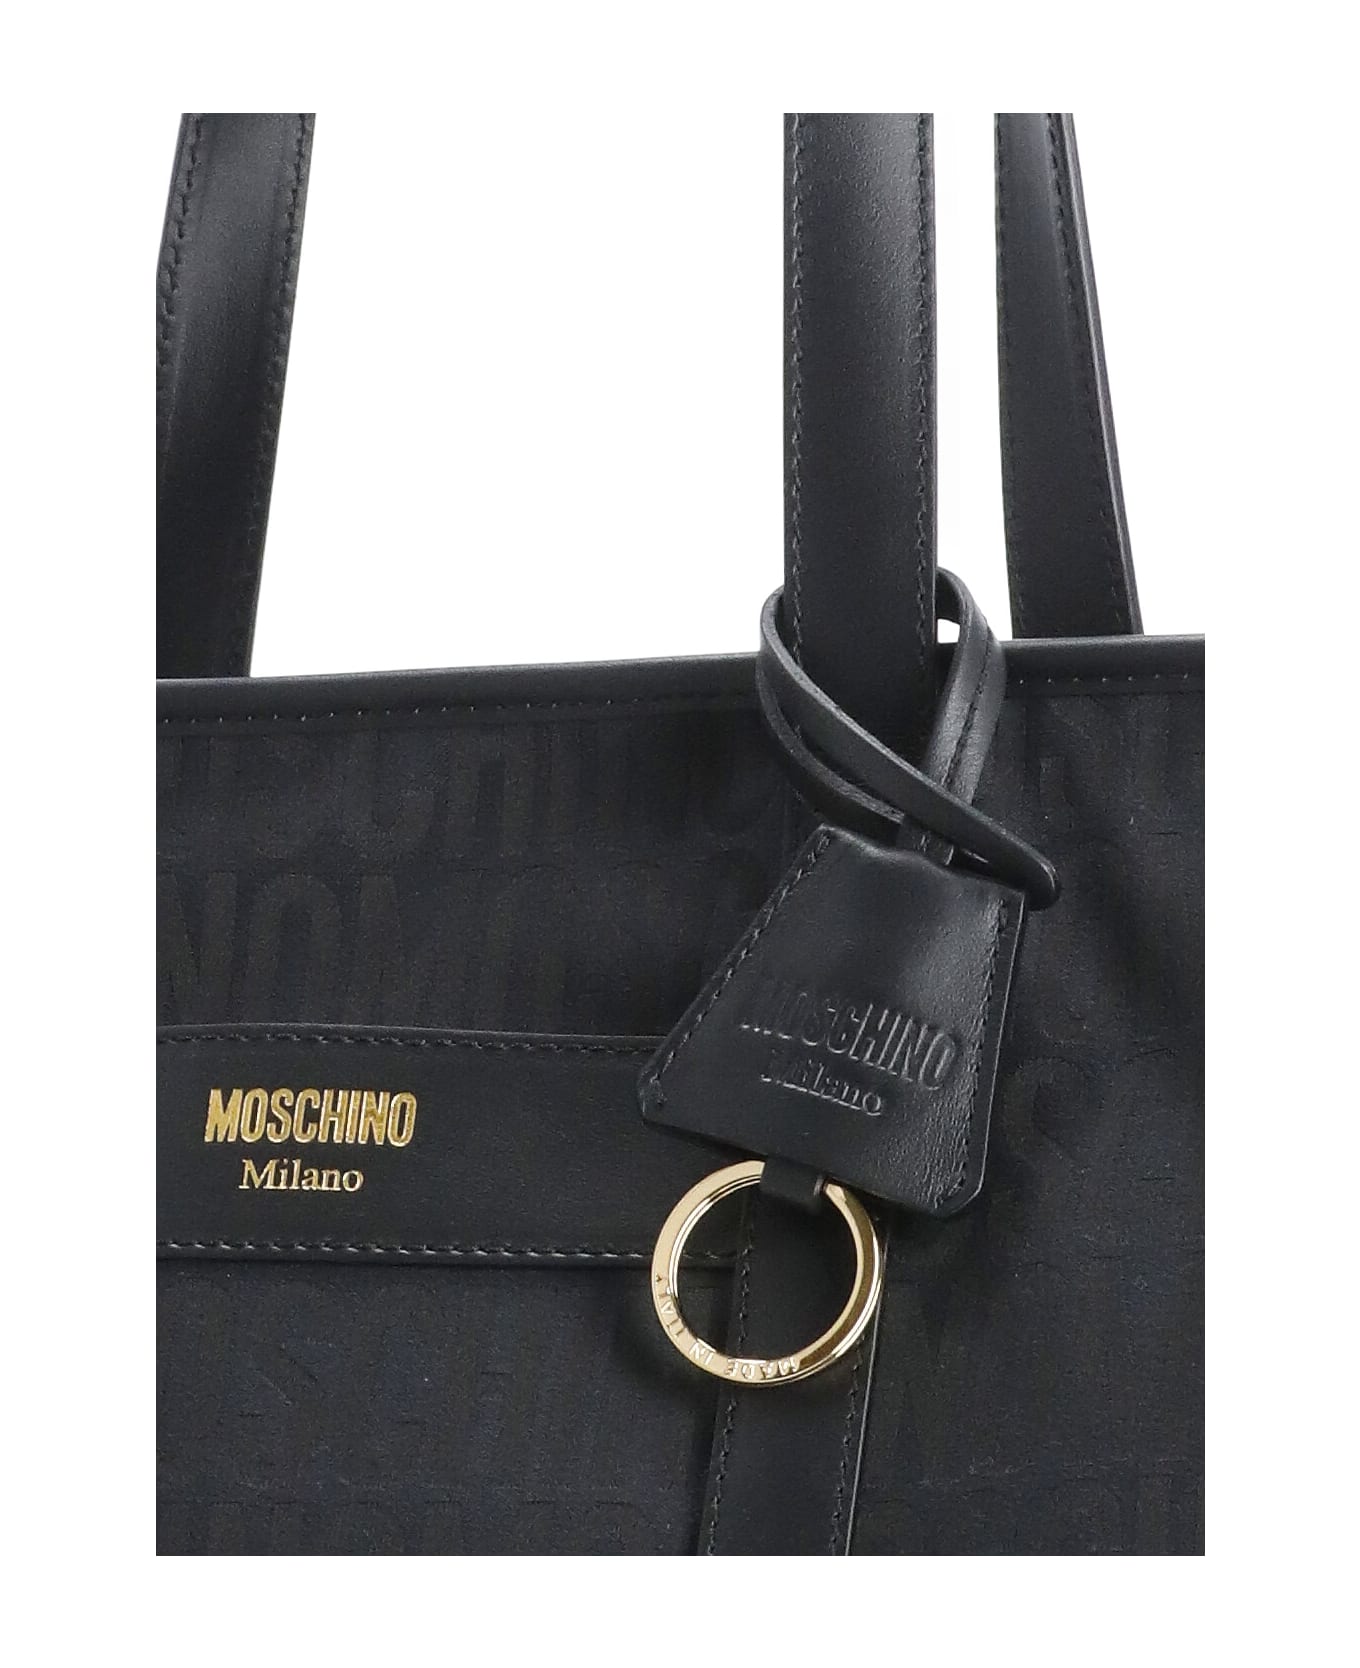 Moschino Shopping Bag With Logo - Black トートバッグ